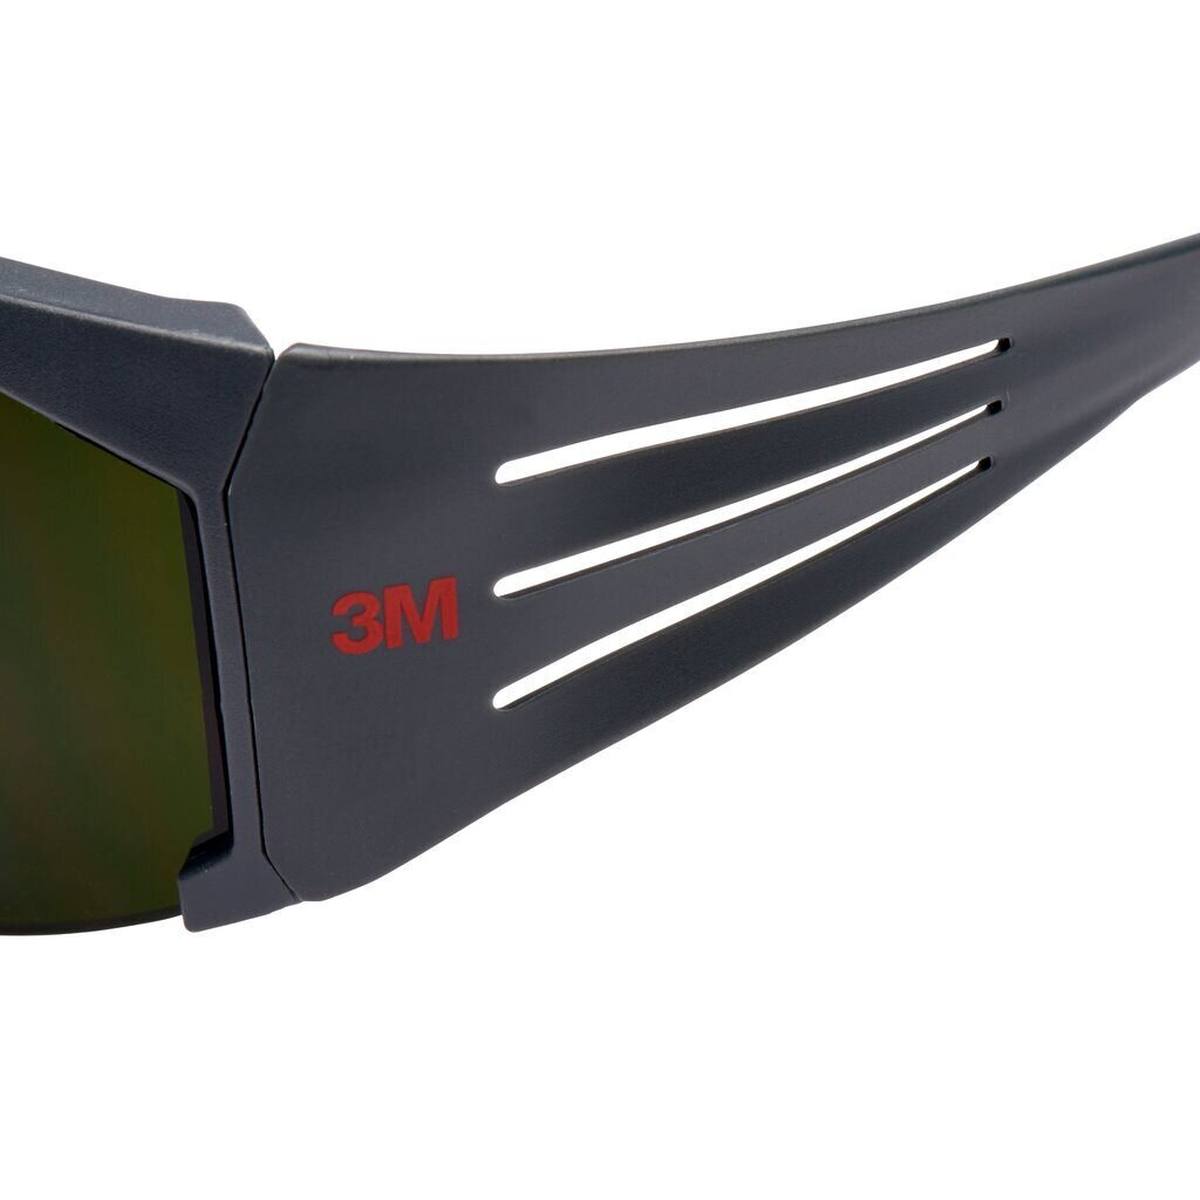 3M SecureFit 600 safety spectacles, grey temples, anti-scratch coating, welding lens protection level 5.0, SF650AS-EU